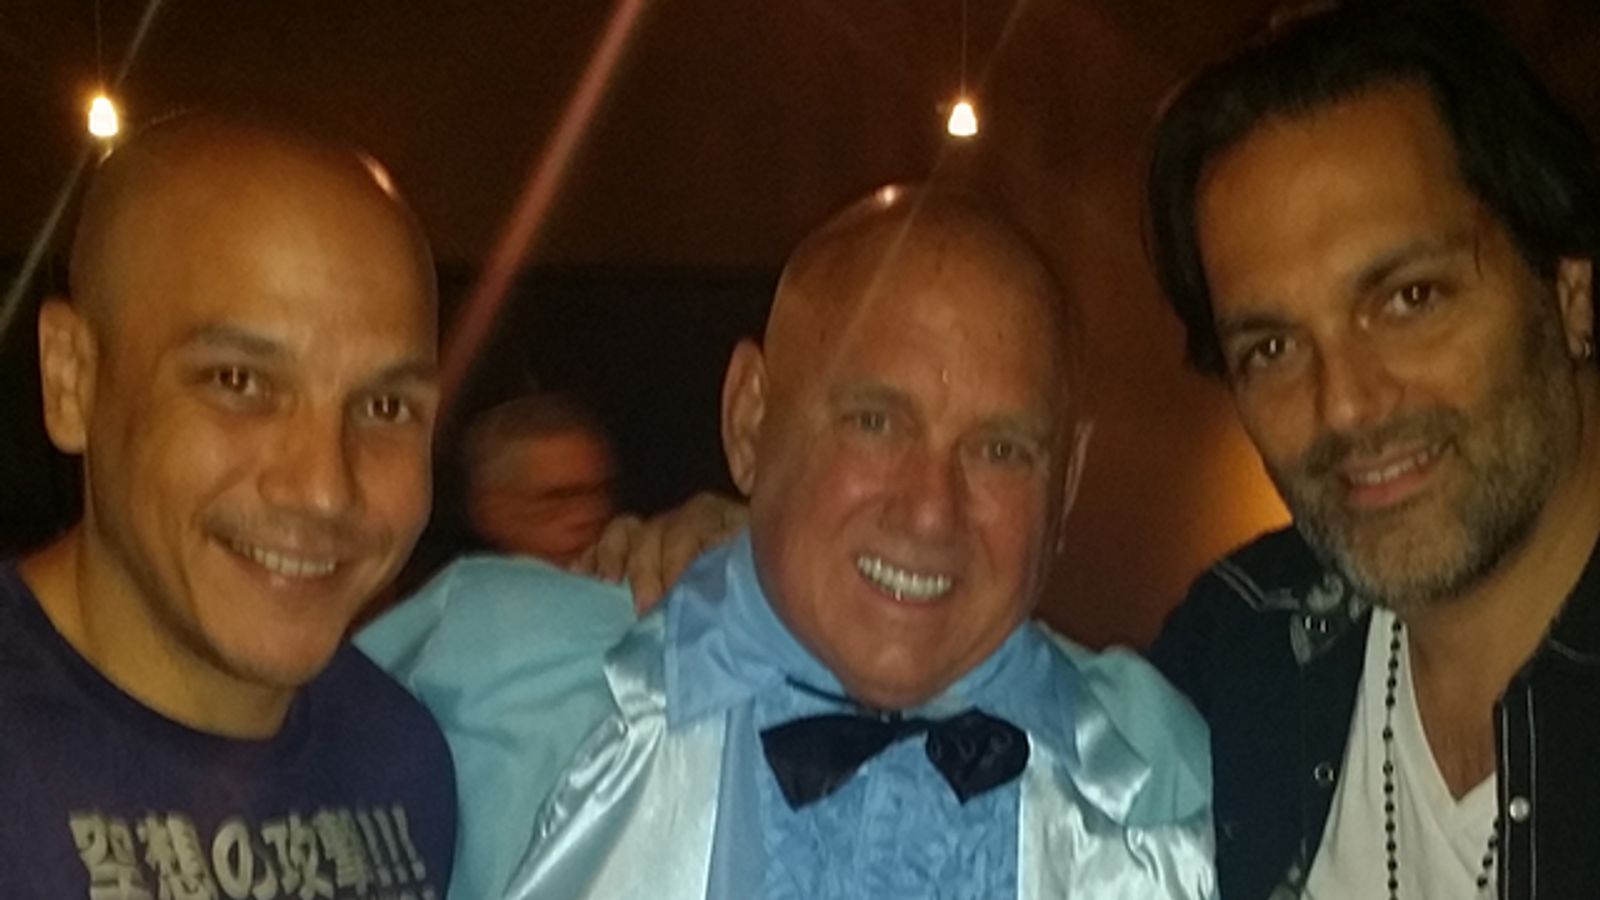 SDR Show Covers Dennis Hof’s Birthday Weekend at Bunny Ranch